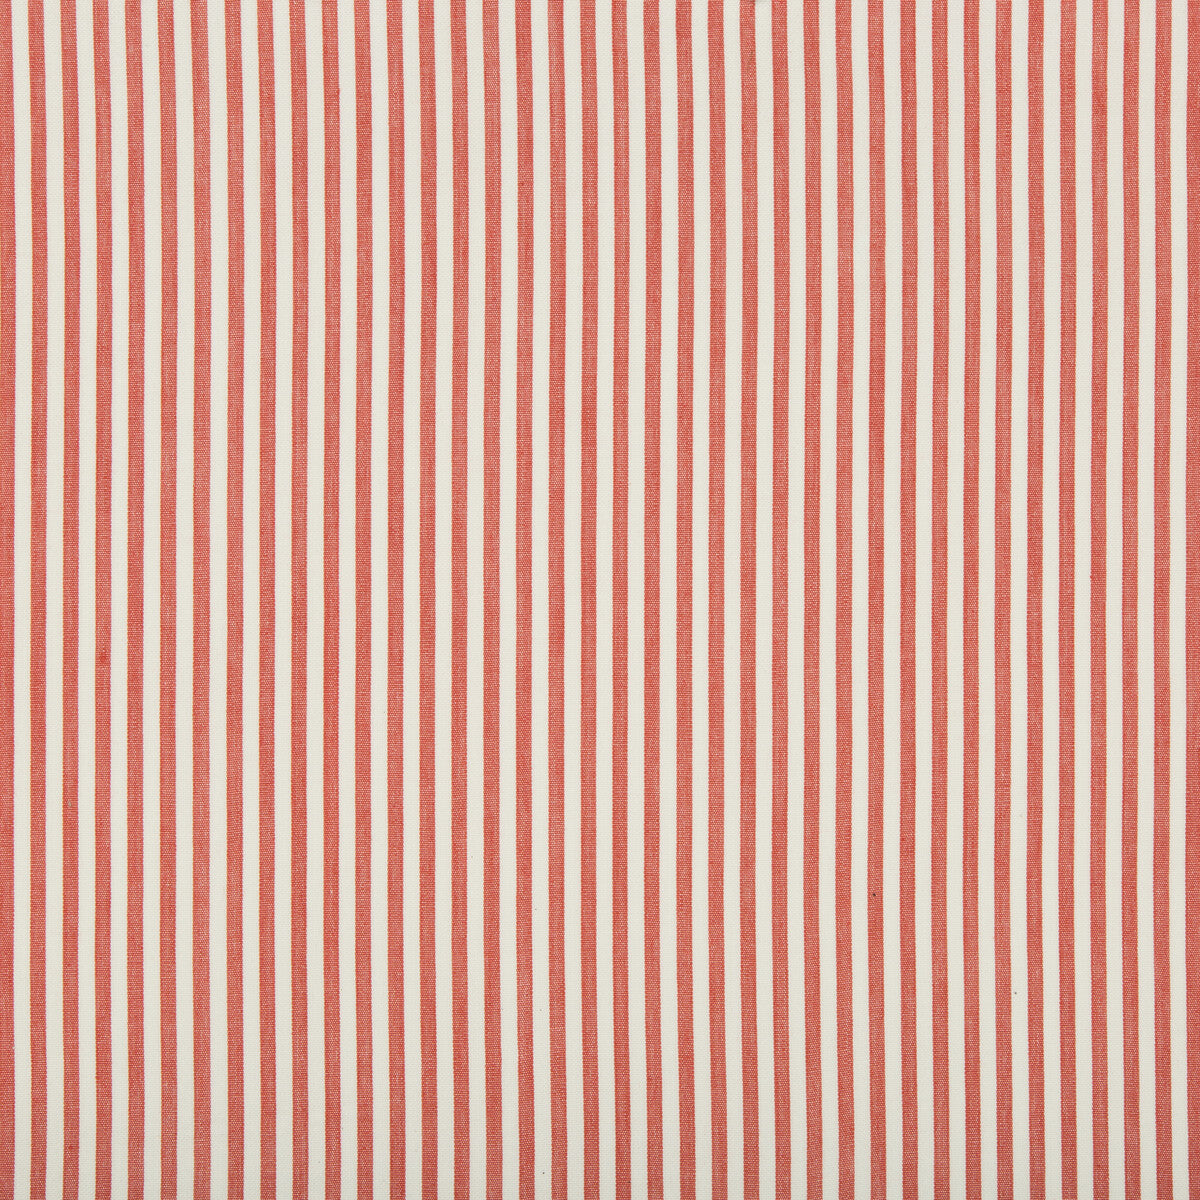 Cap Ferrat Stripe fabric in red color - pattern 2018146.119.0 - by Lee Jofa in the Suzanne Kasler The Riviera collection